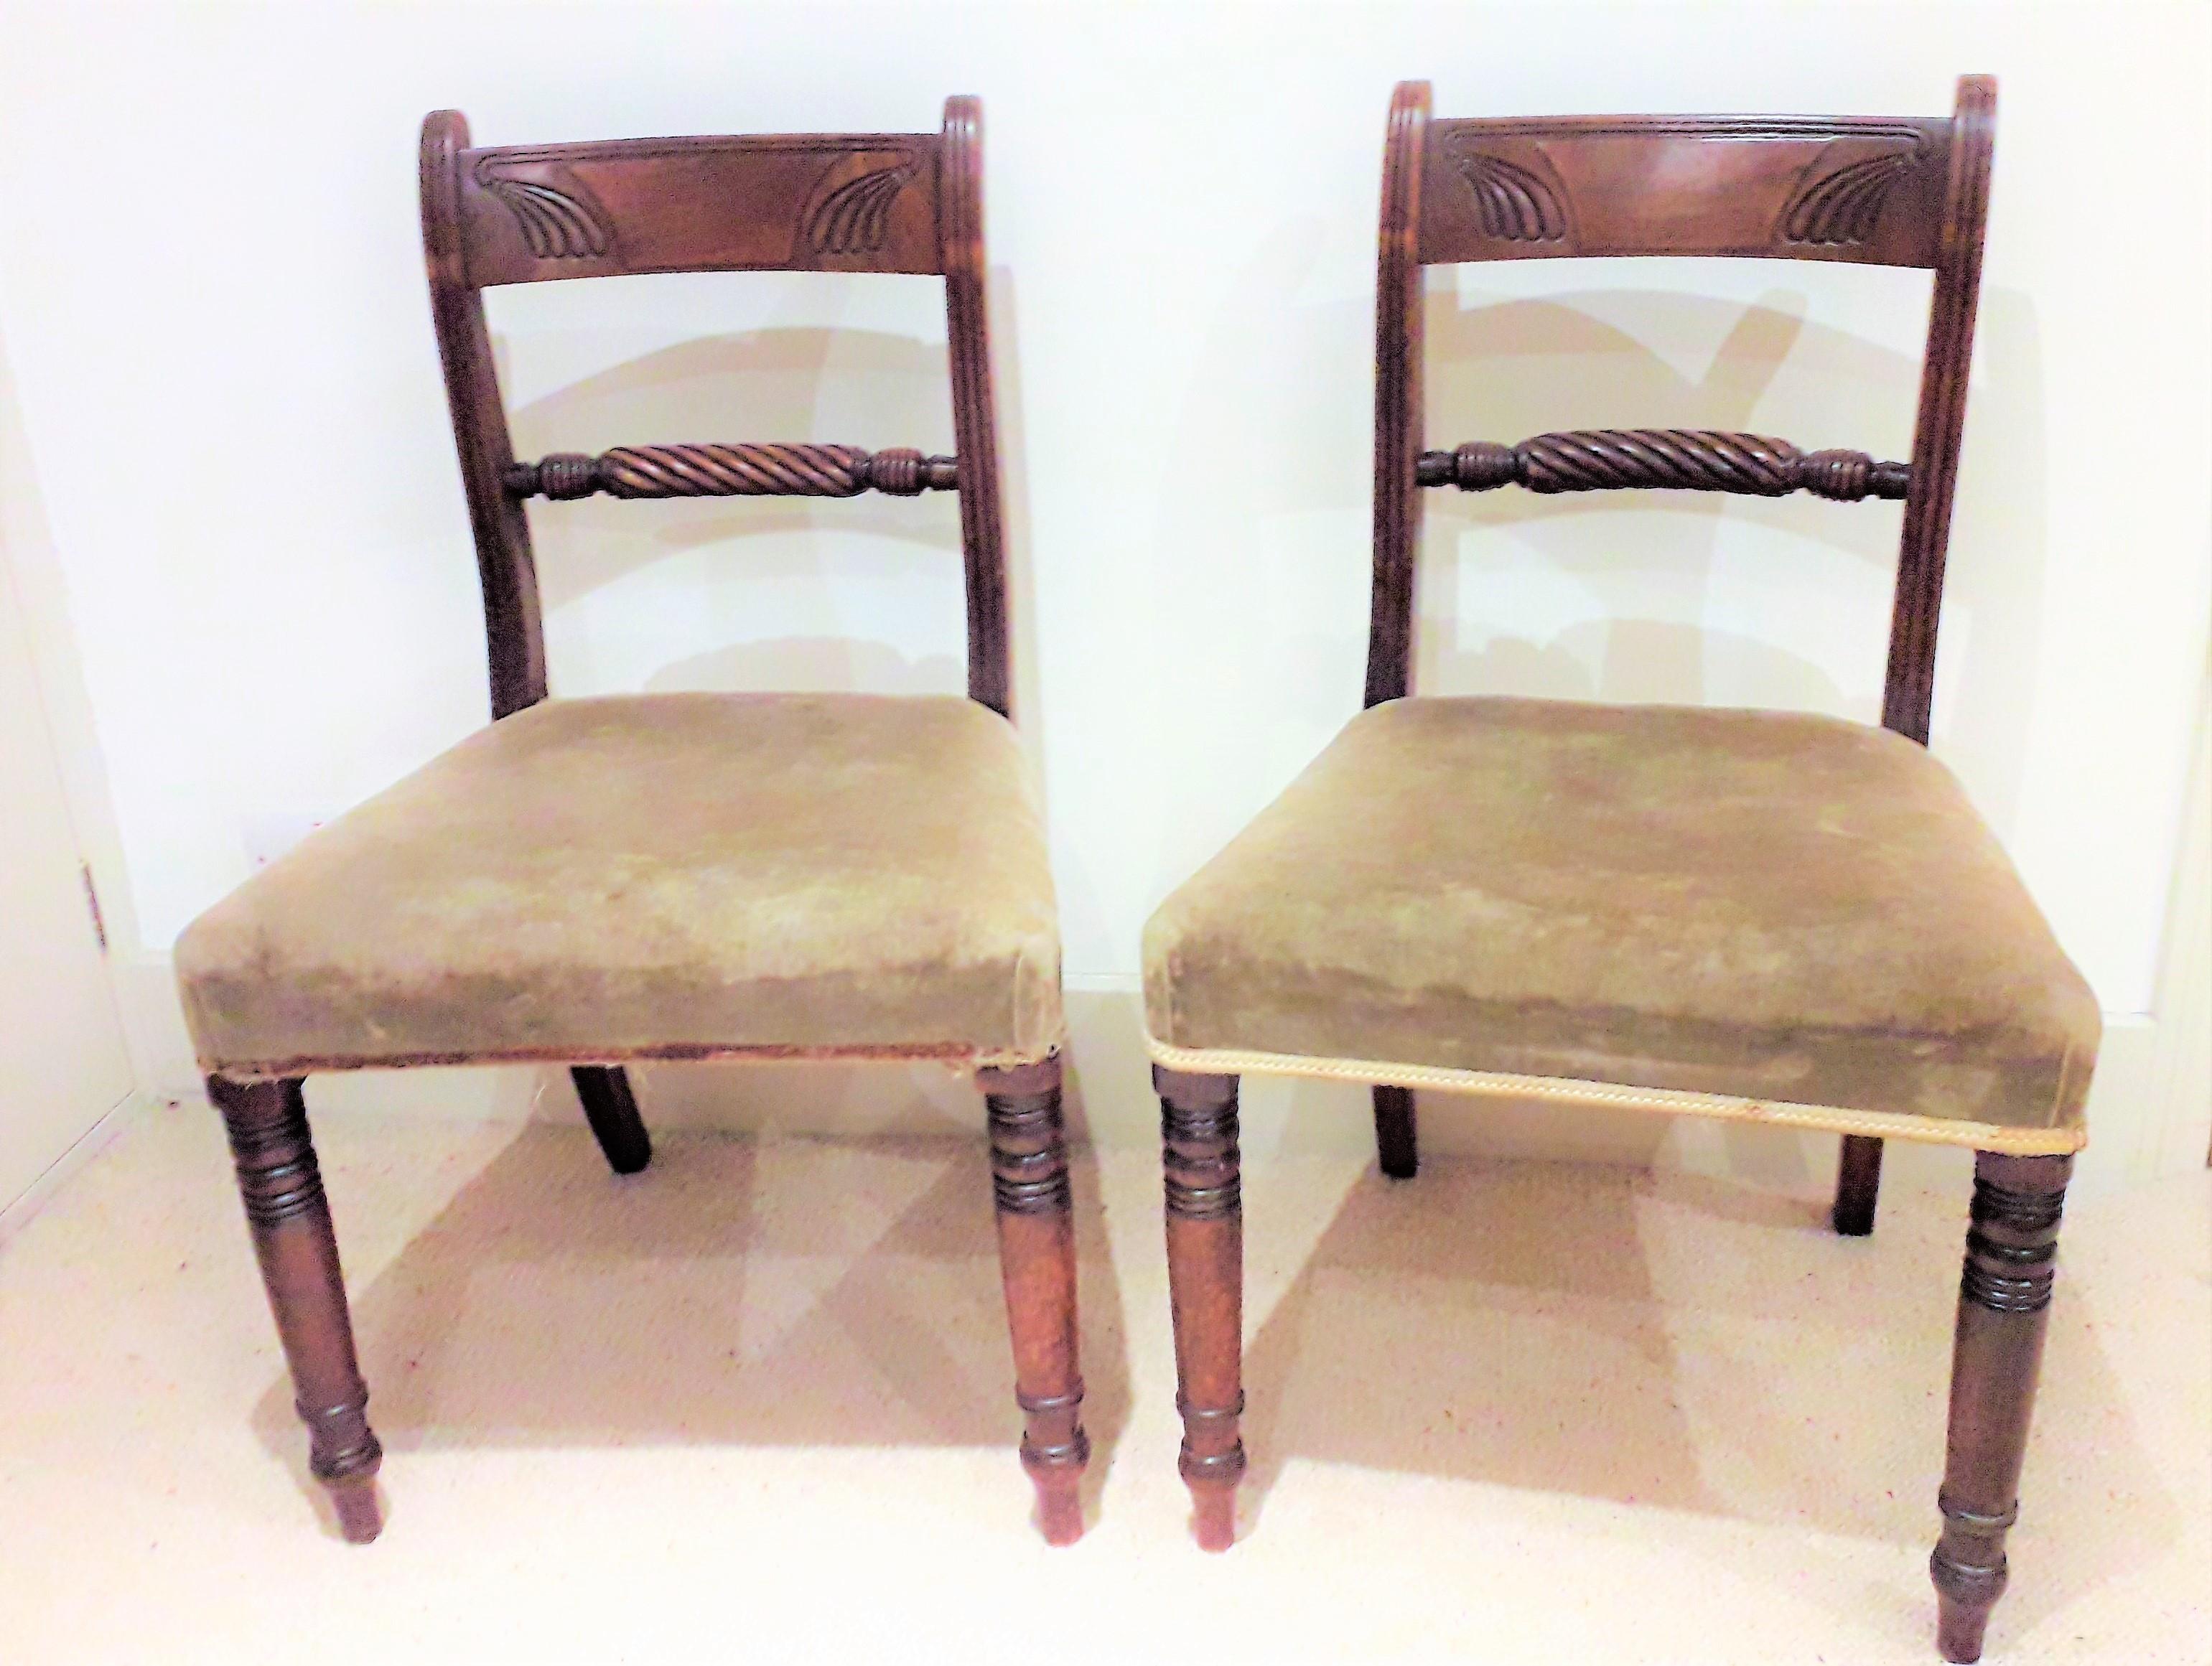 Pair of Regency side chairs in mahogany with original soft patination, the carved back and rope twist rails giving extra fine London made detailing, the back legs in out swept style with the fronts legs being ring turned, all in the true Regency